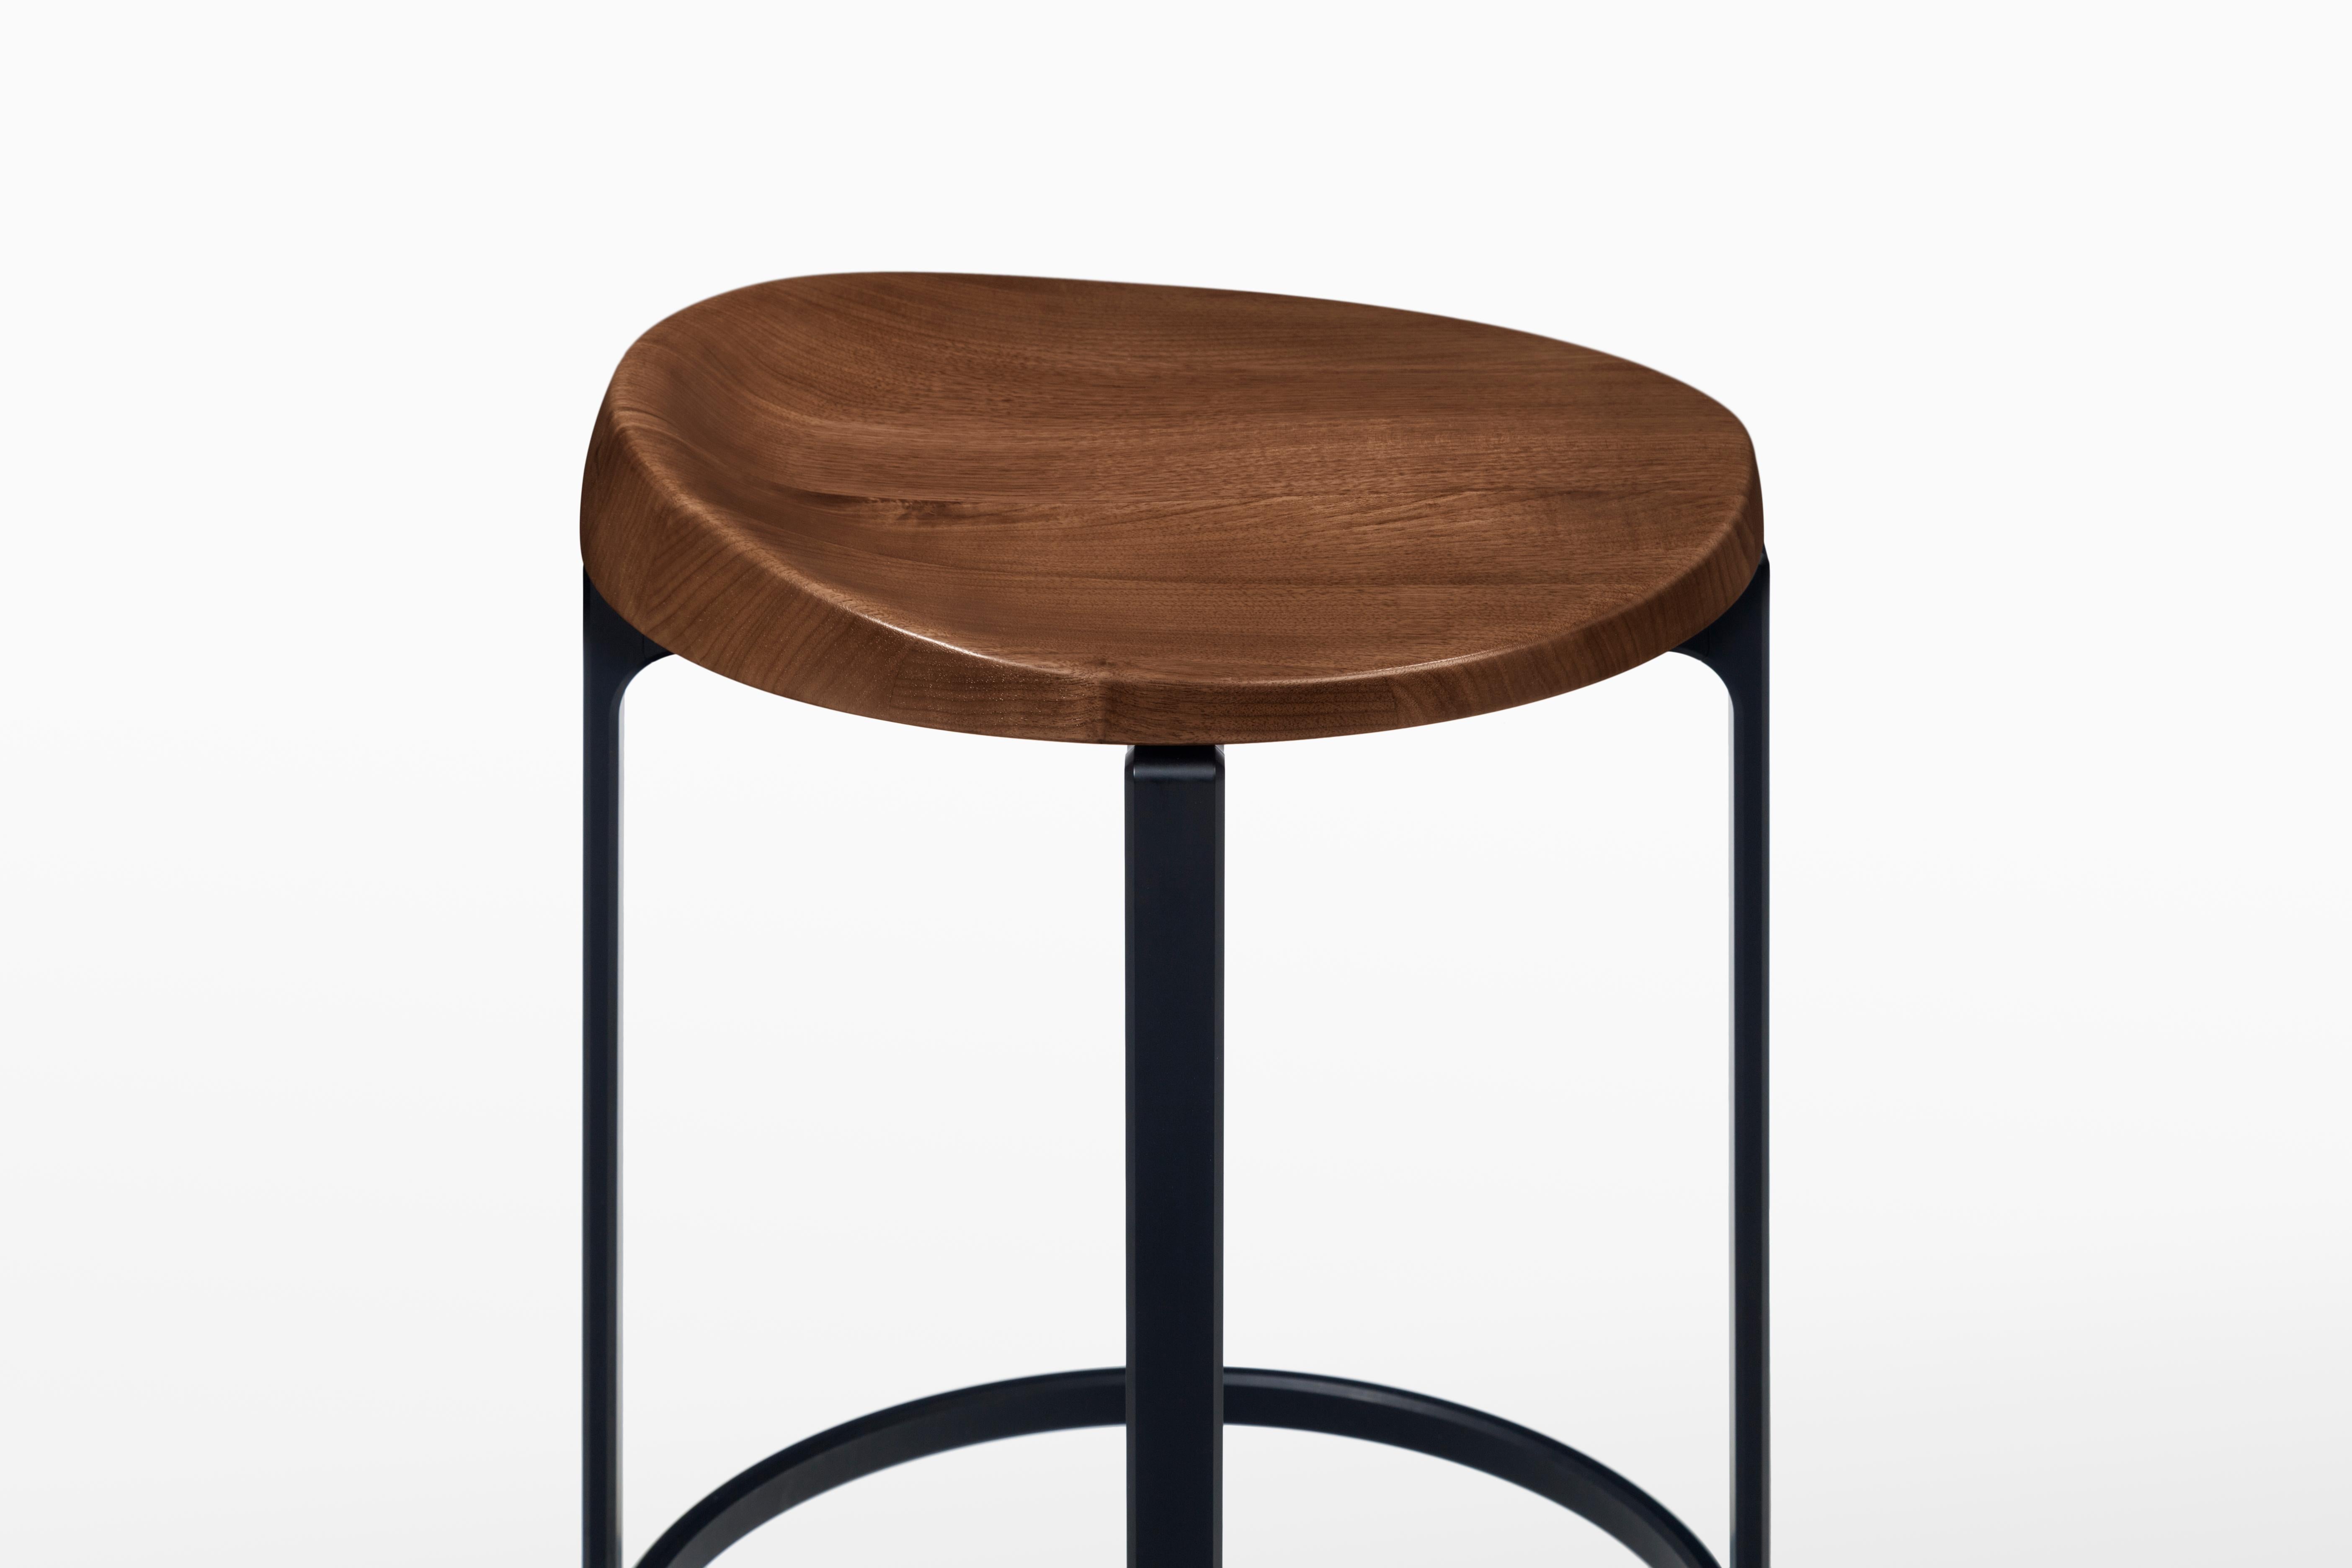 HOLLY HUNT Pepper bar stool with walnut cinder seat and aluminum frame. Unusual yet innovative, the Pepper Barstool design was inspired by the sectioned appearance of a sliced bell pepper. Advanced aluminum crafting techniques were used to construct